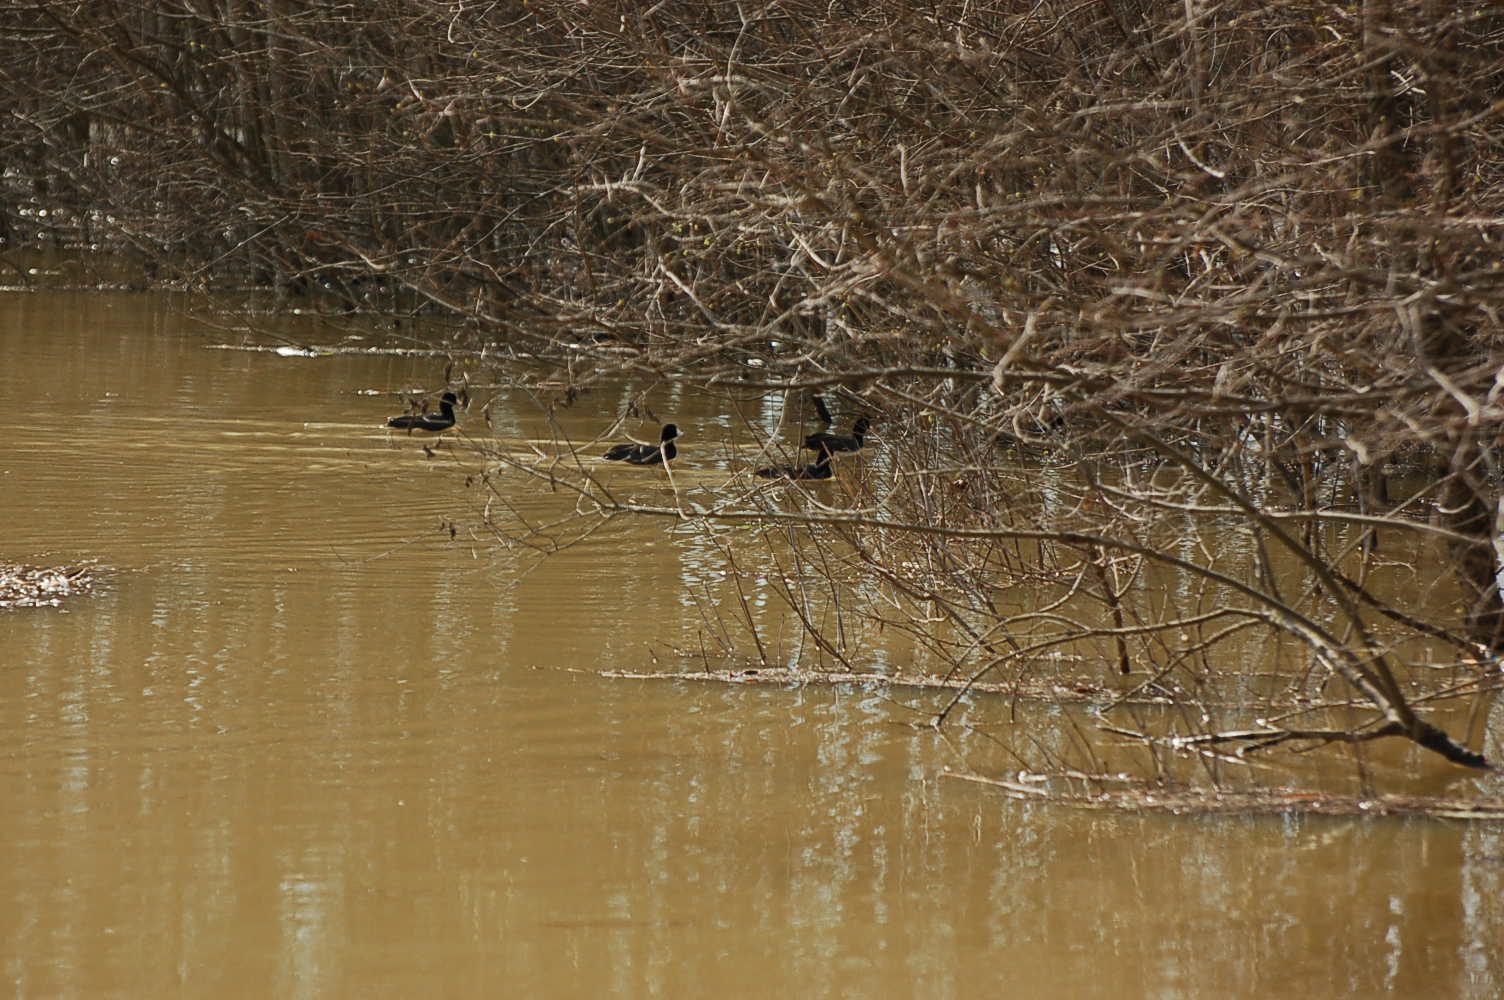 two geese swimming on a muddy pond together